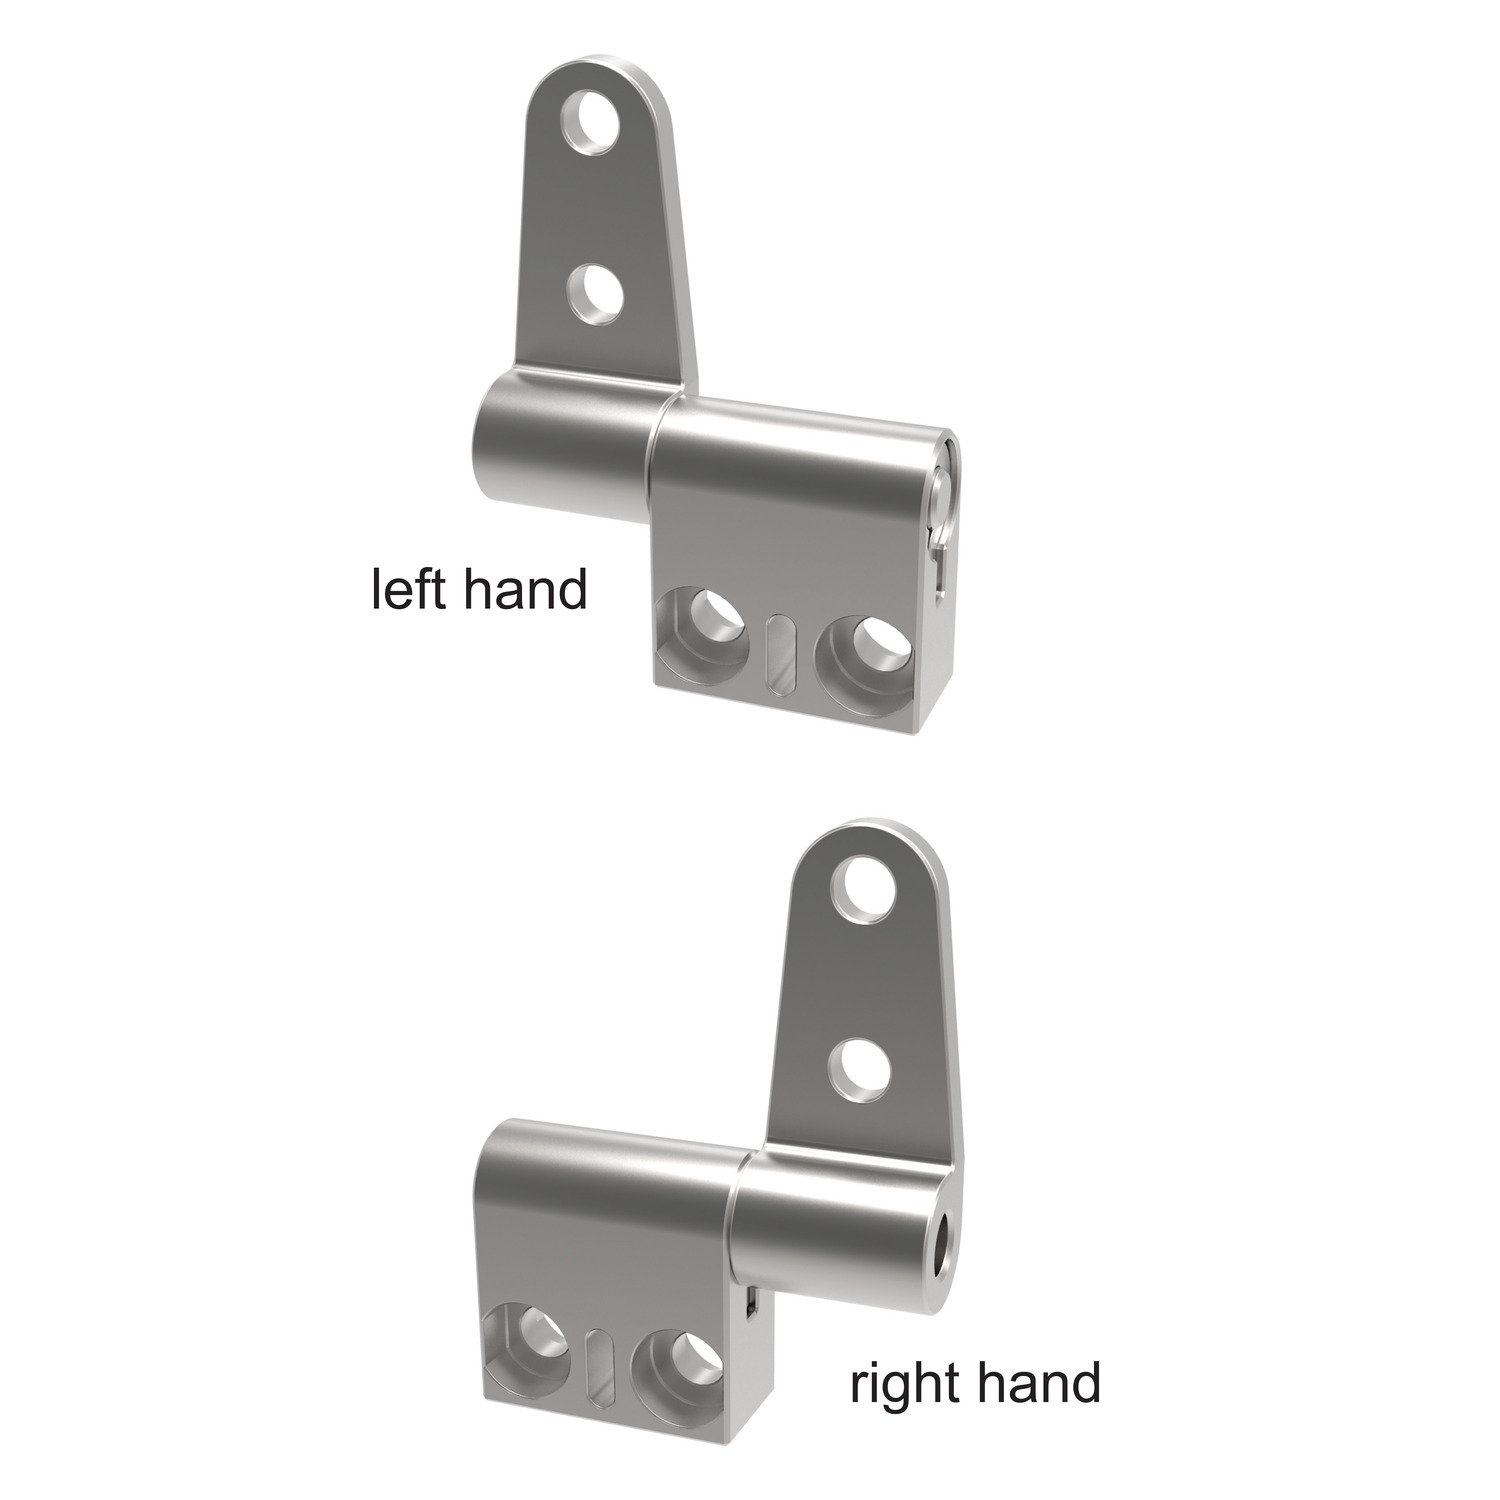 Friction Hinges - Symmetric Asymmetric torque friction hinges with a torque of 0,5 - 1 Nm. Left and Right hand.